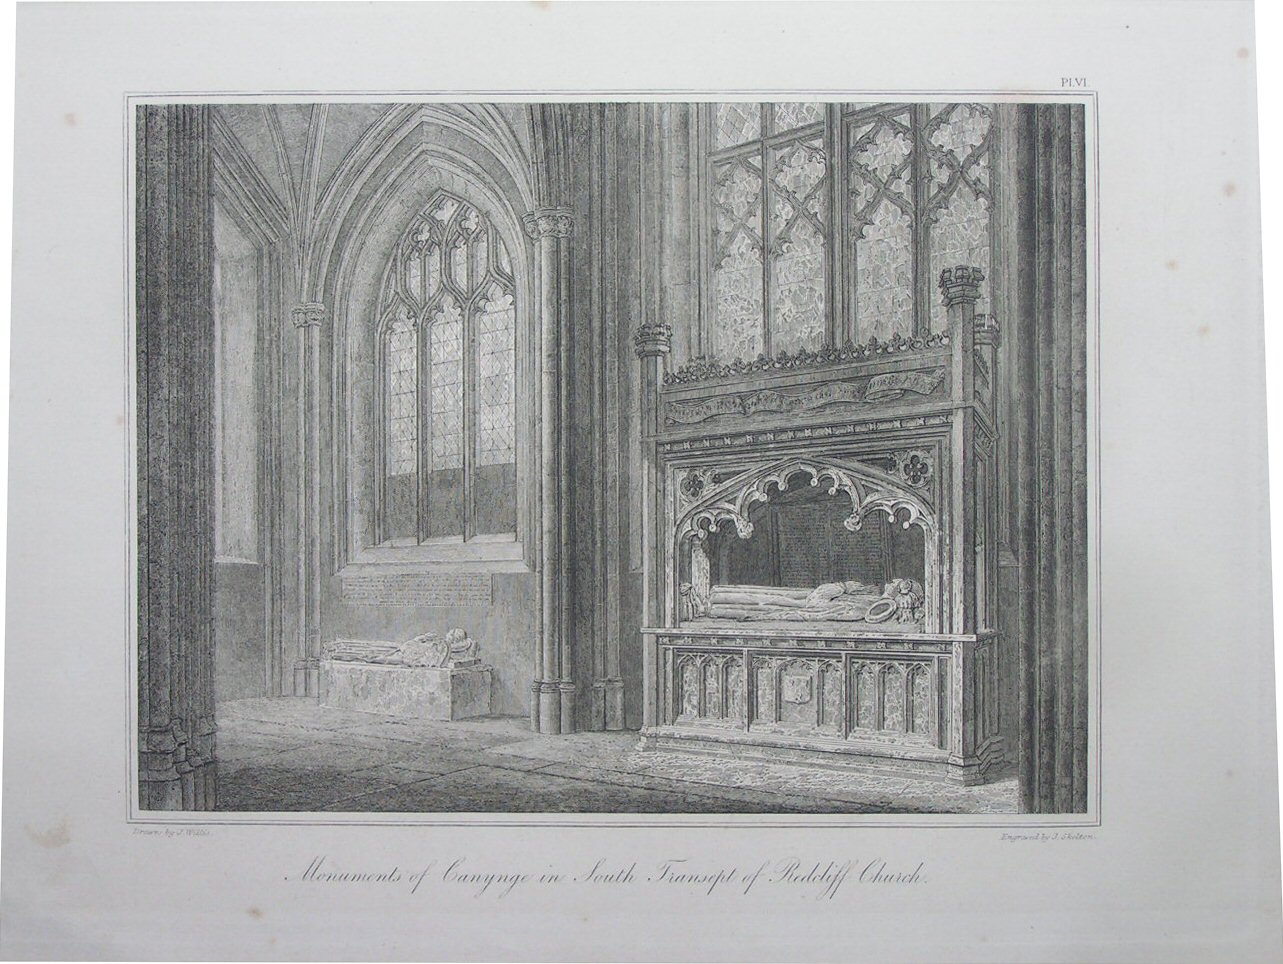 Etching - Monuments of Canynge in South Transcept of Redcliff Church - Skelton